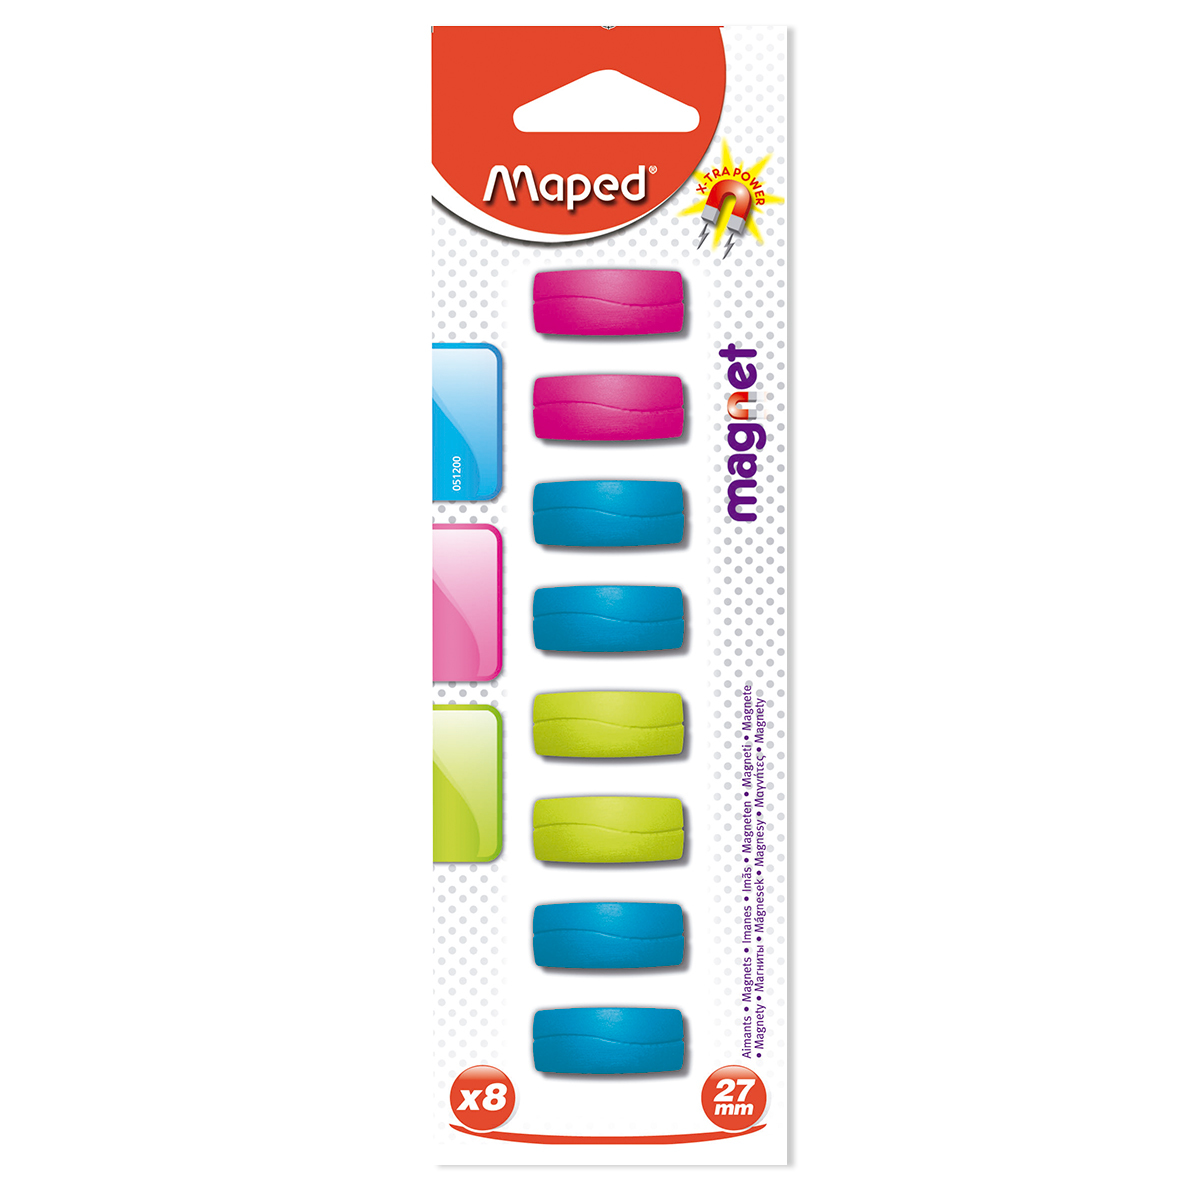 IMANES MAPED RECTANGULO (COLORES, 8 PZS.) | Office Depot Mexico